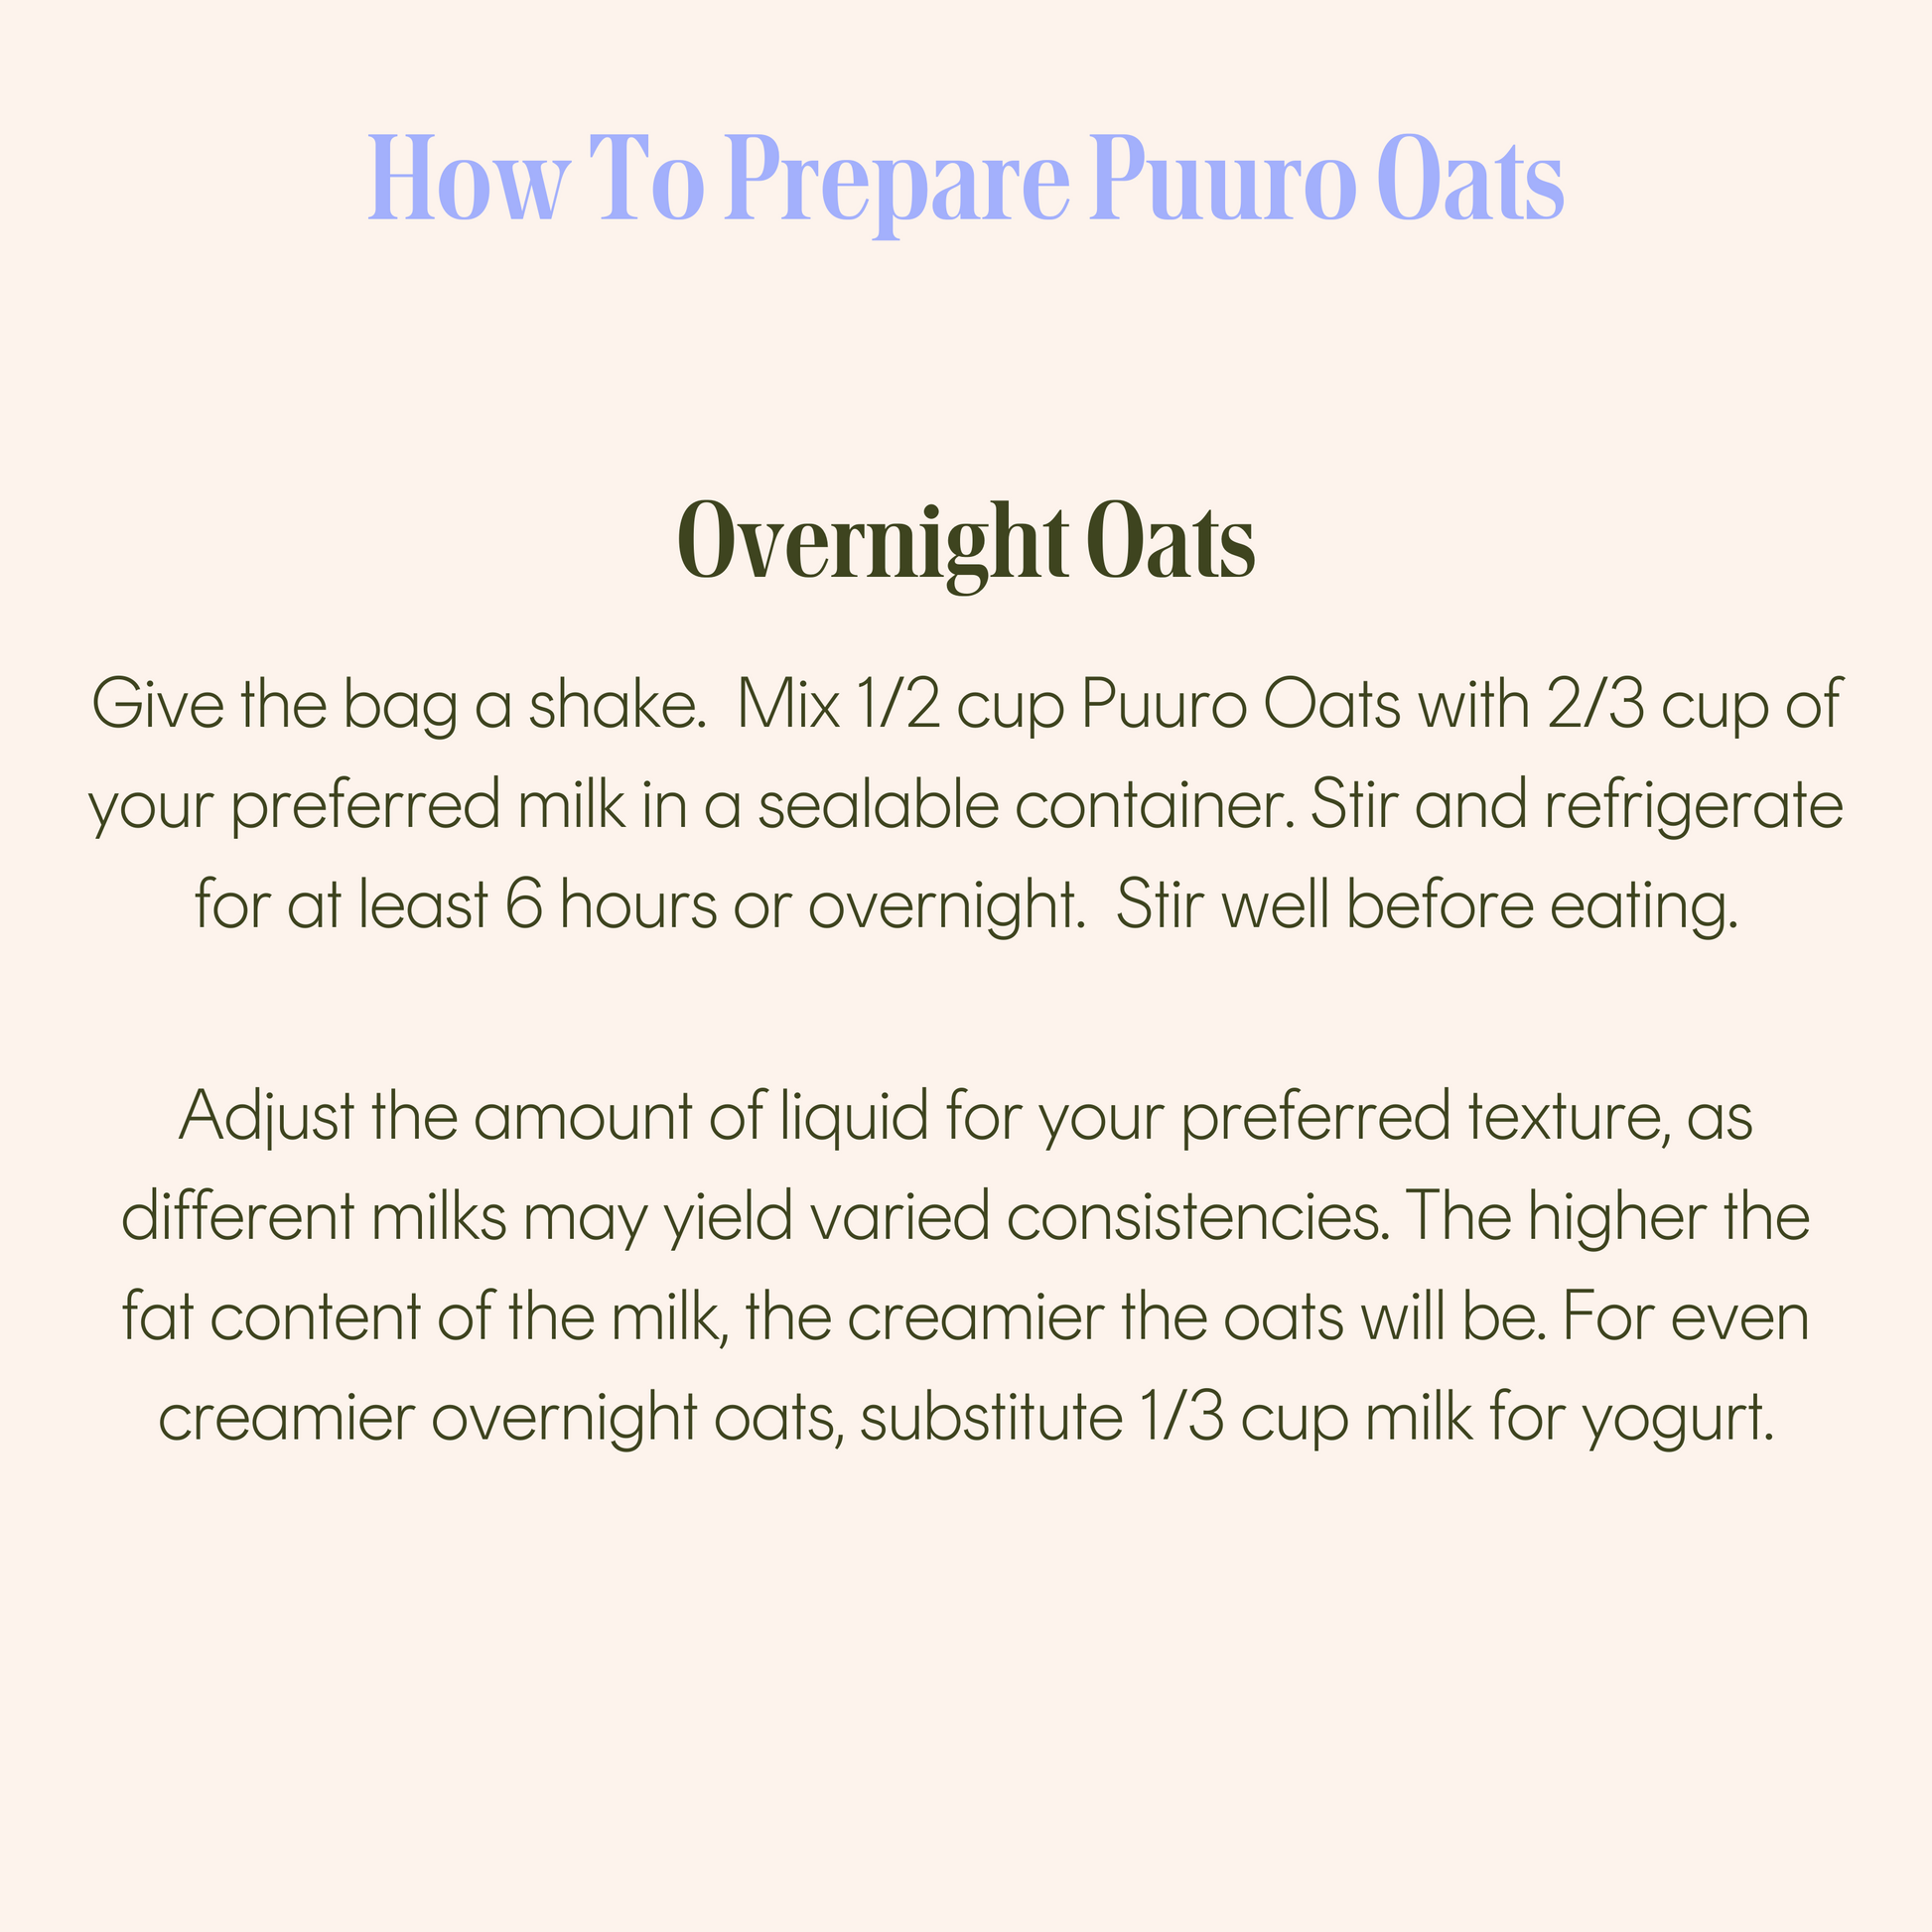 Instructions on how to prepare Puuro Oats as overnight oats 